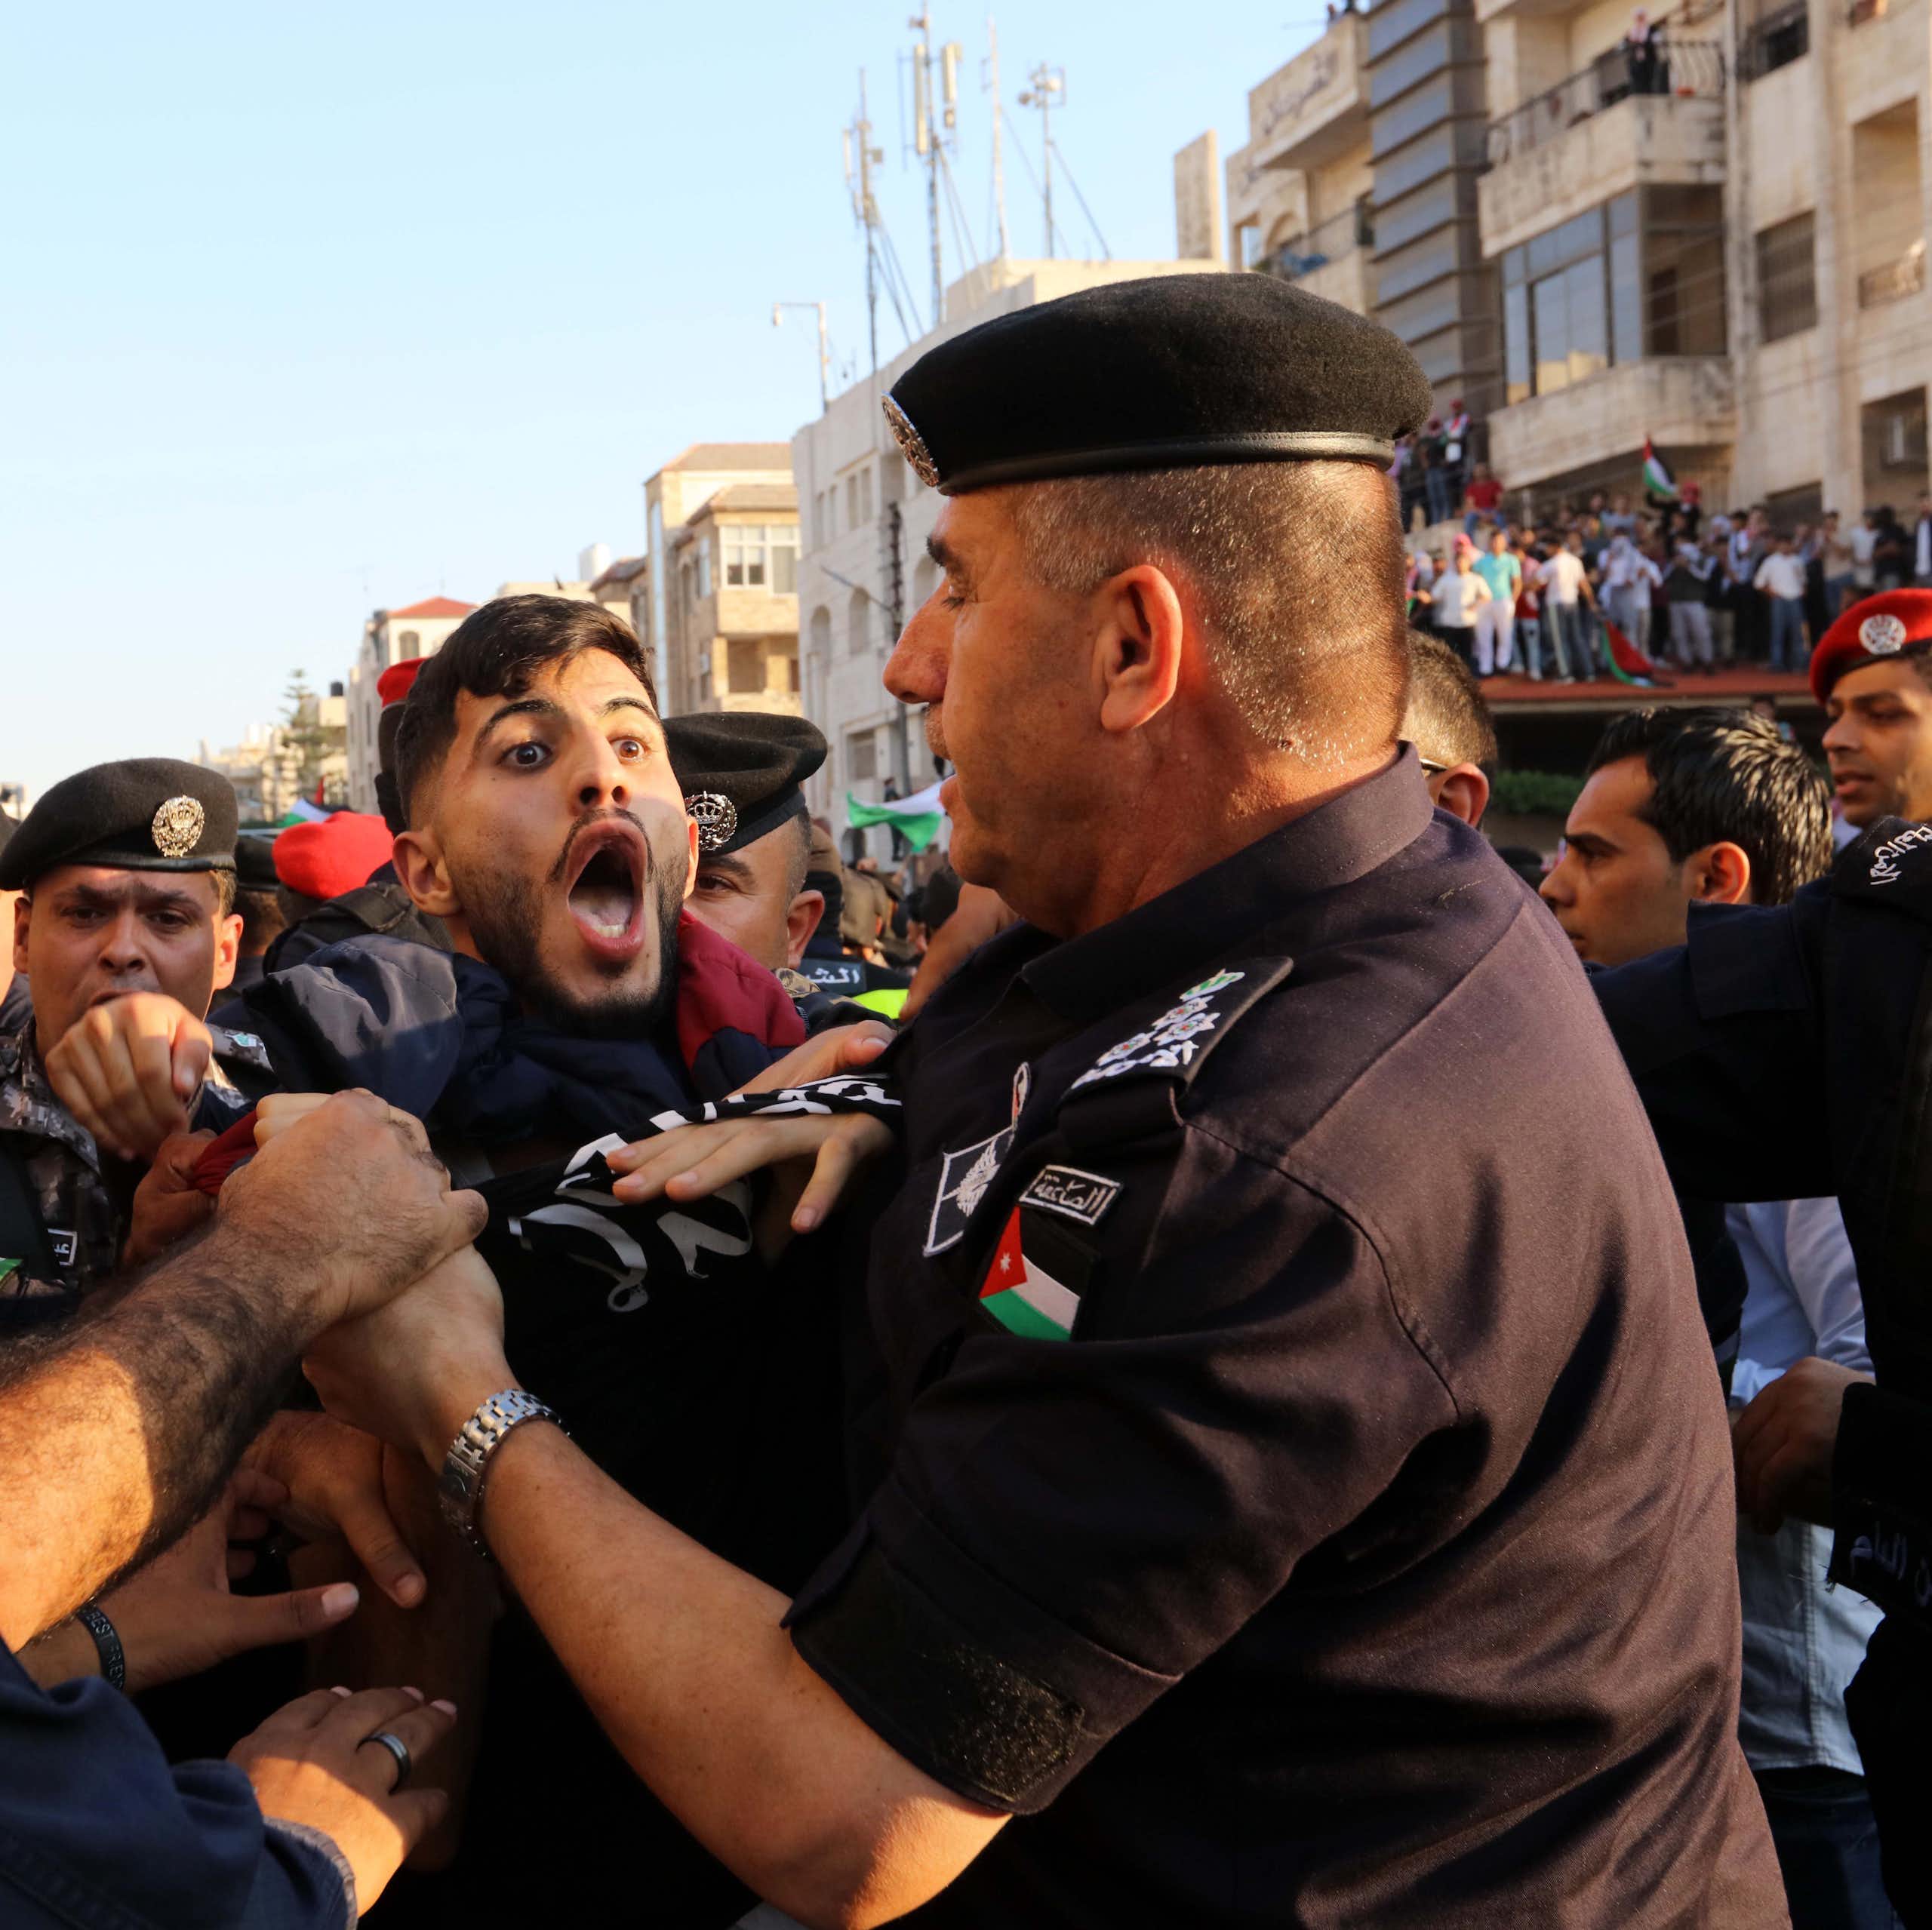 A protestor with his mouth wide open being held back by security personnel. 